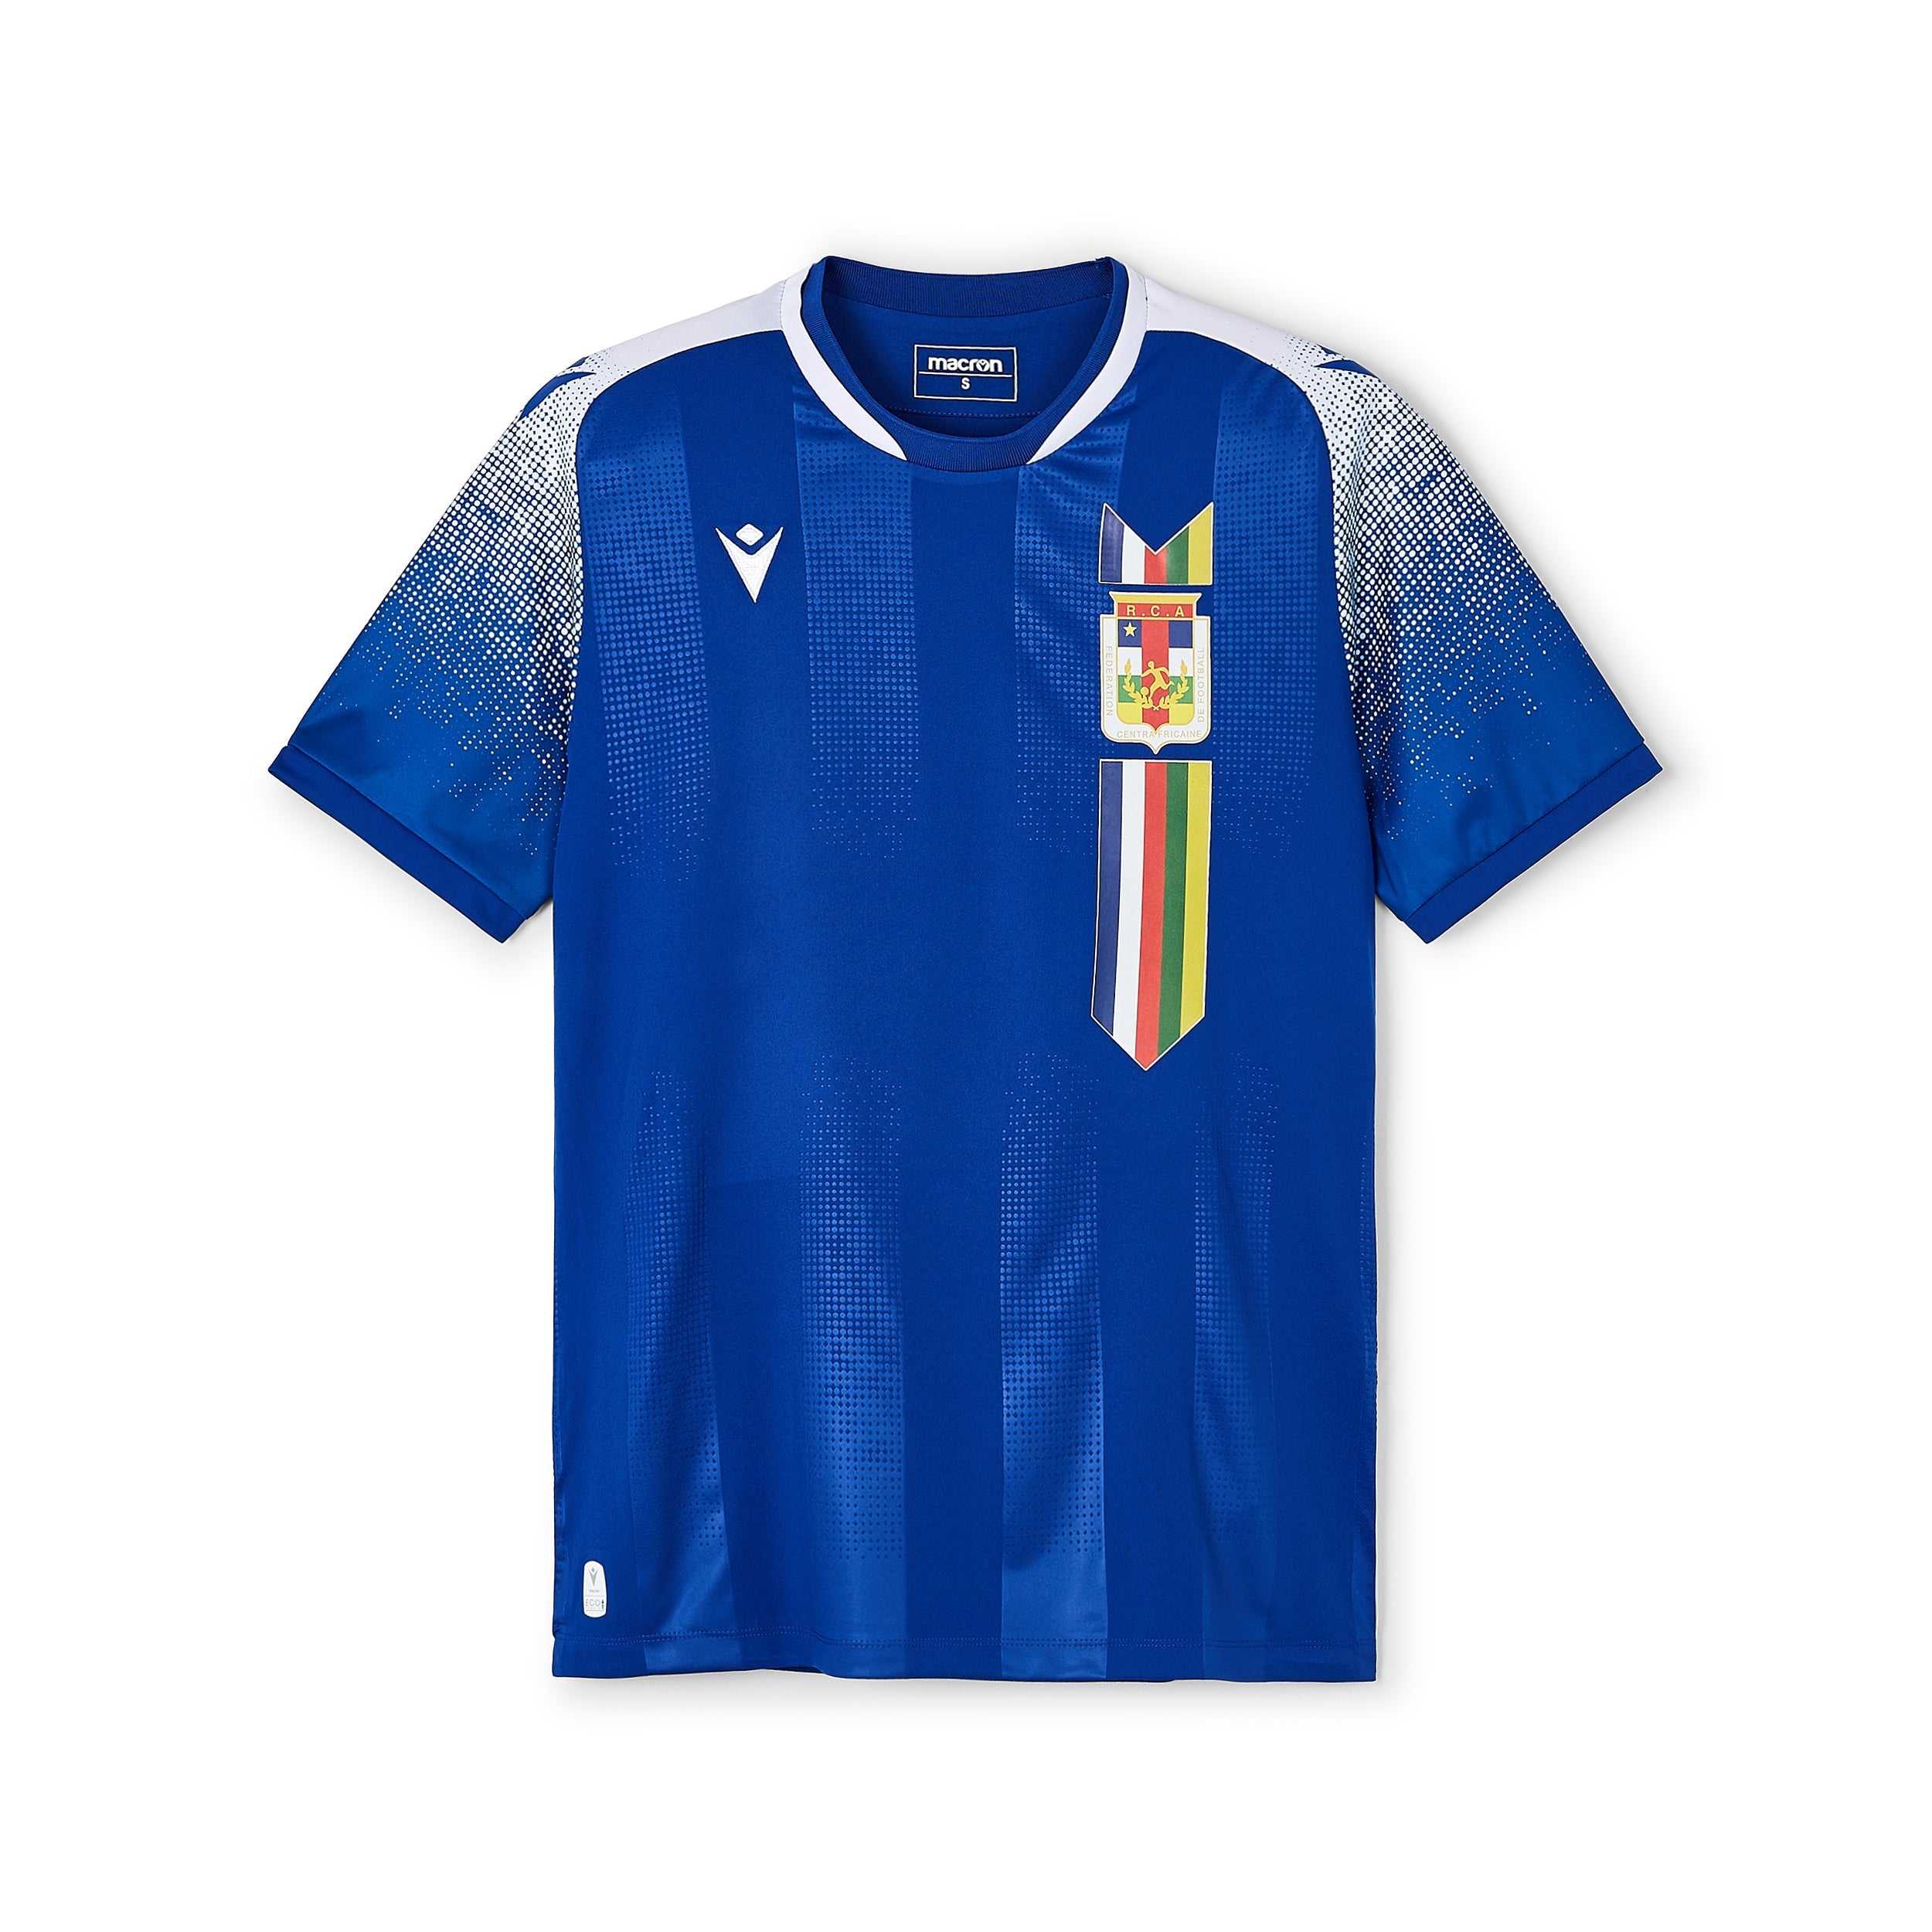 Central African Republic Home Jersey - Men's